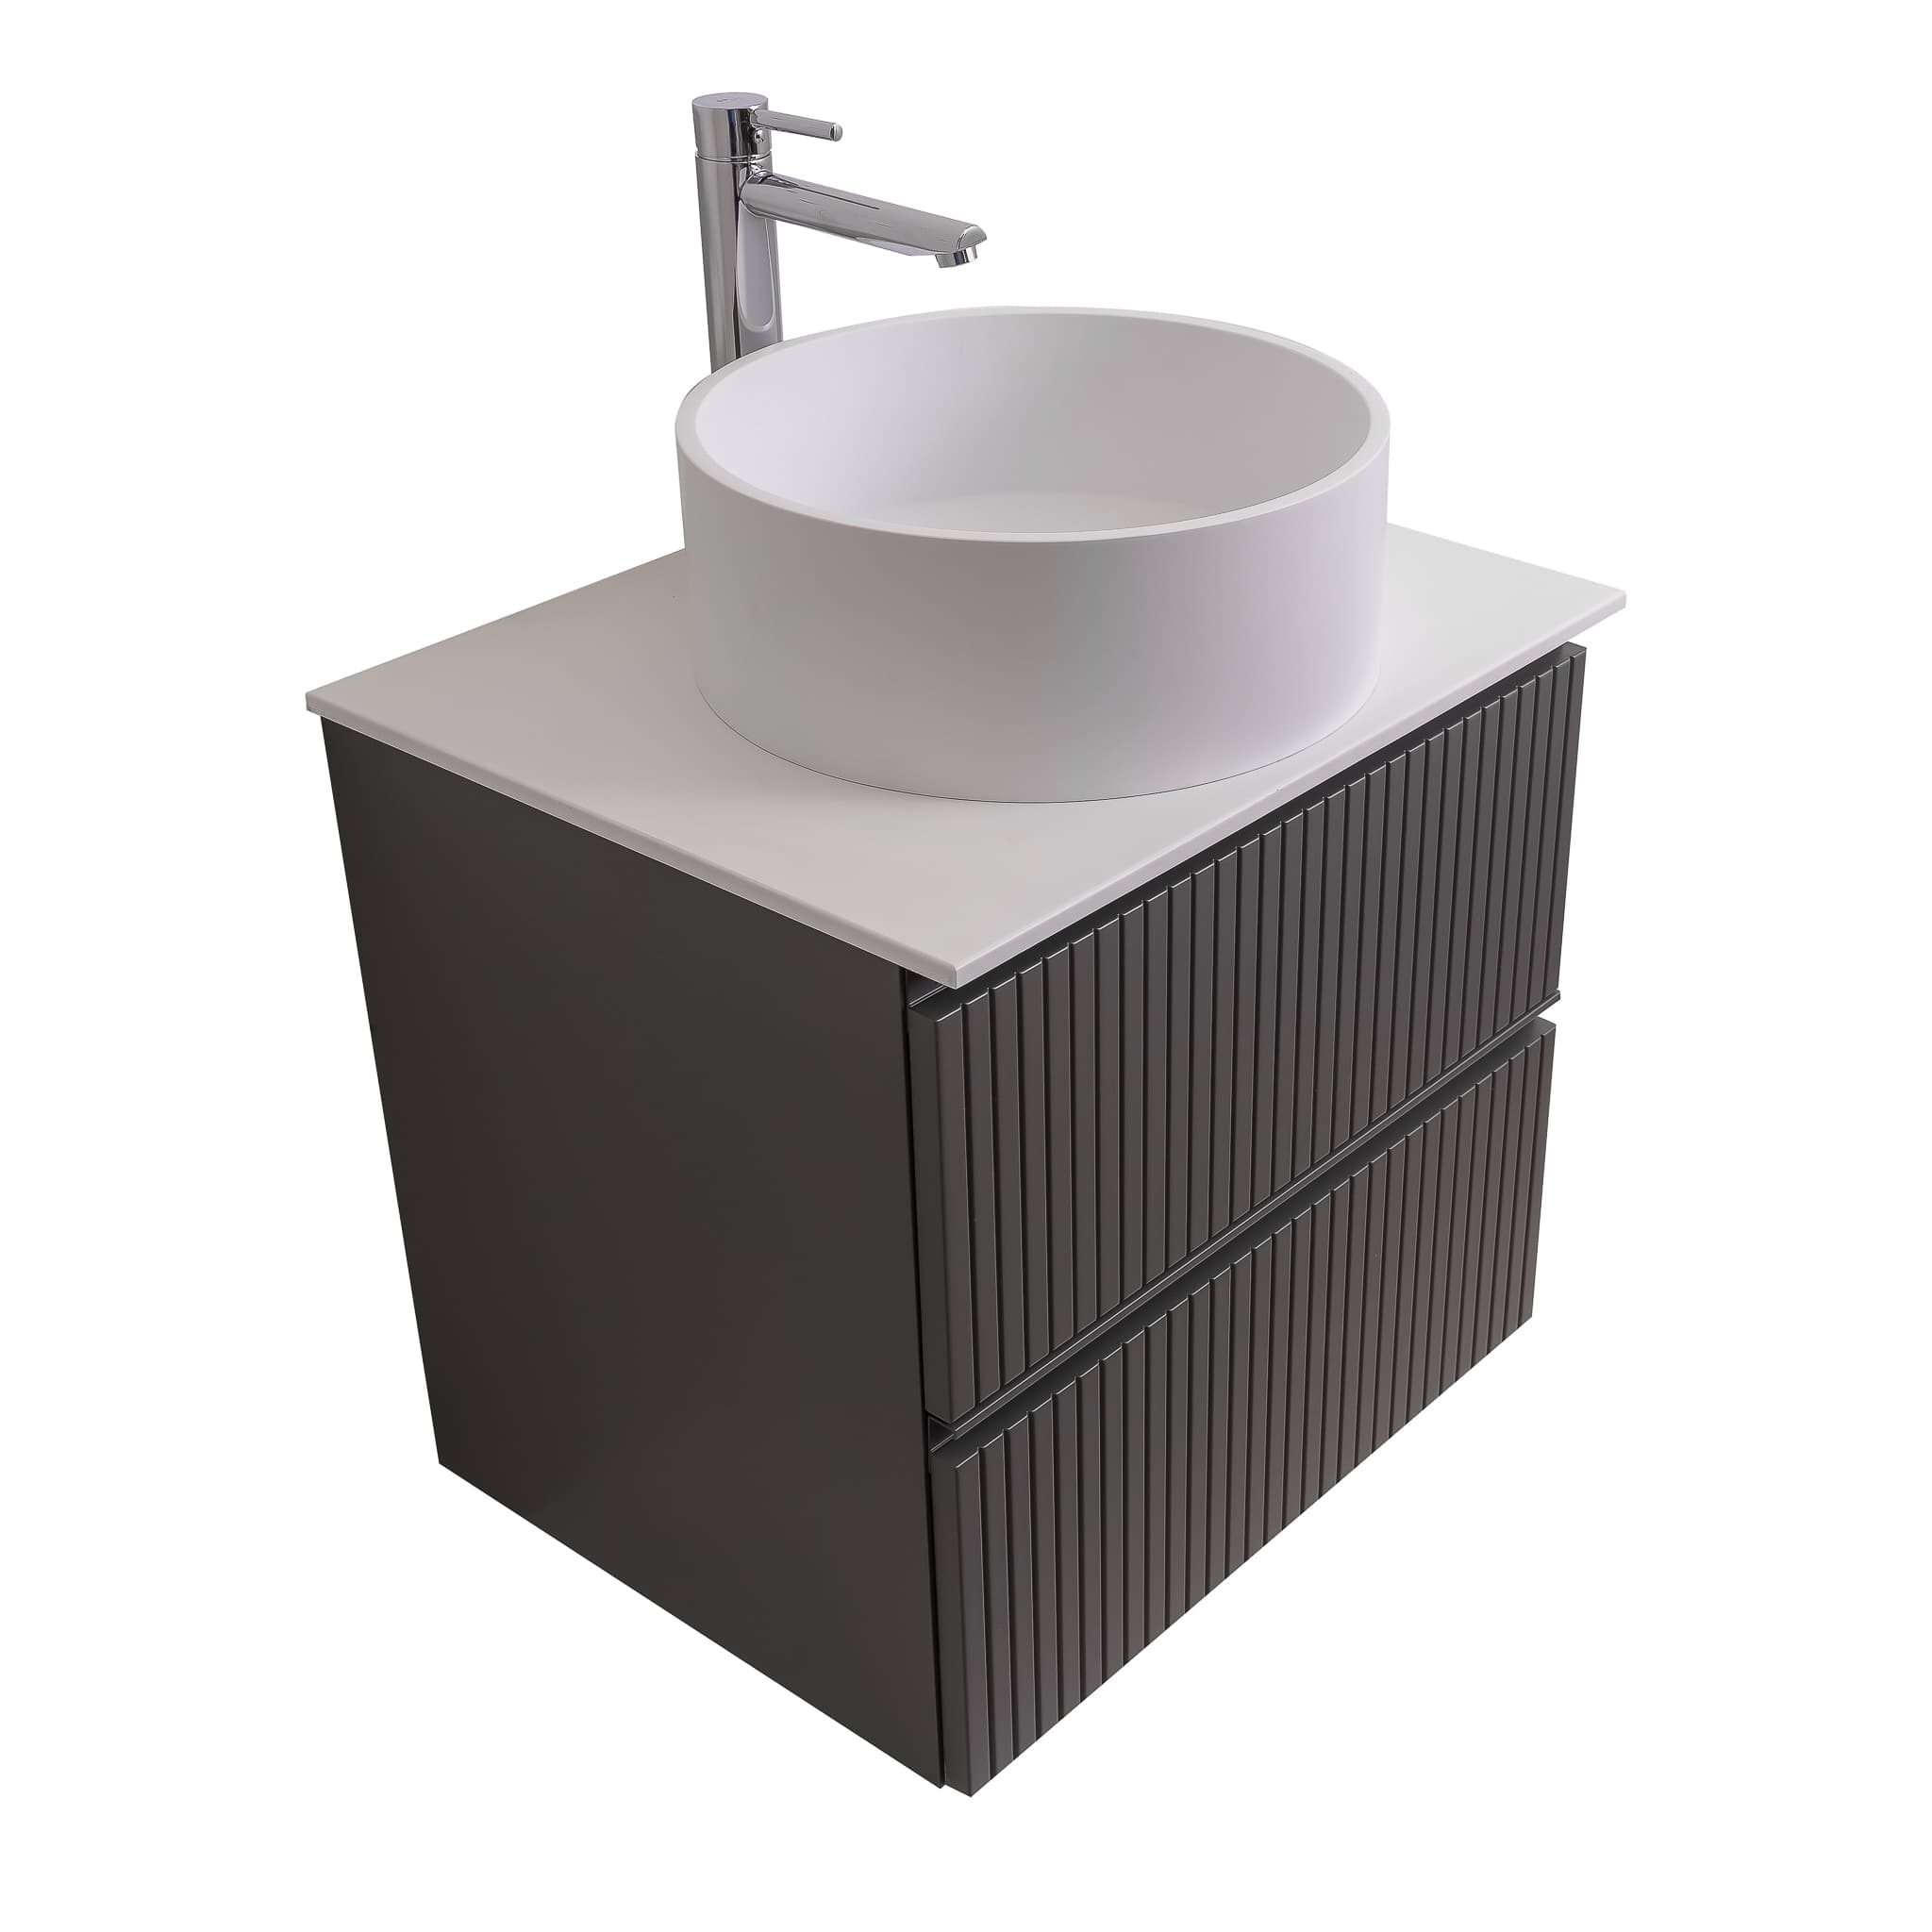 Ares 23.5 Matte Grey Cabinet, Solid Surface Flat White Counter And Round Solid Surface White Basin 1386, Wall Mounted Modern Vanity Set